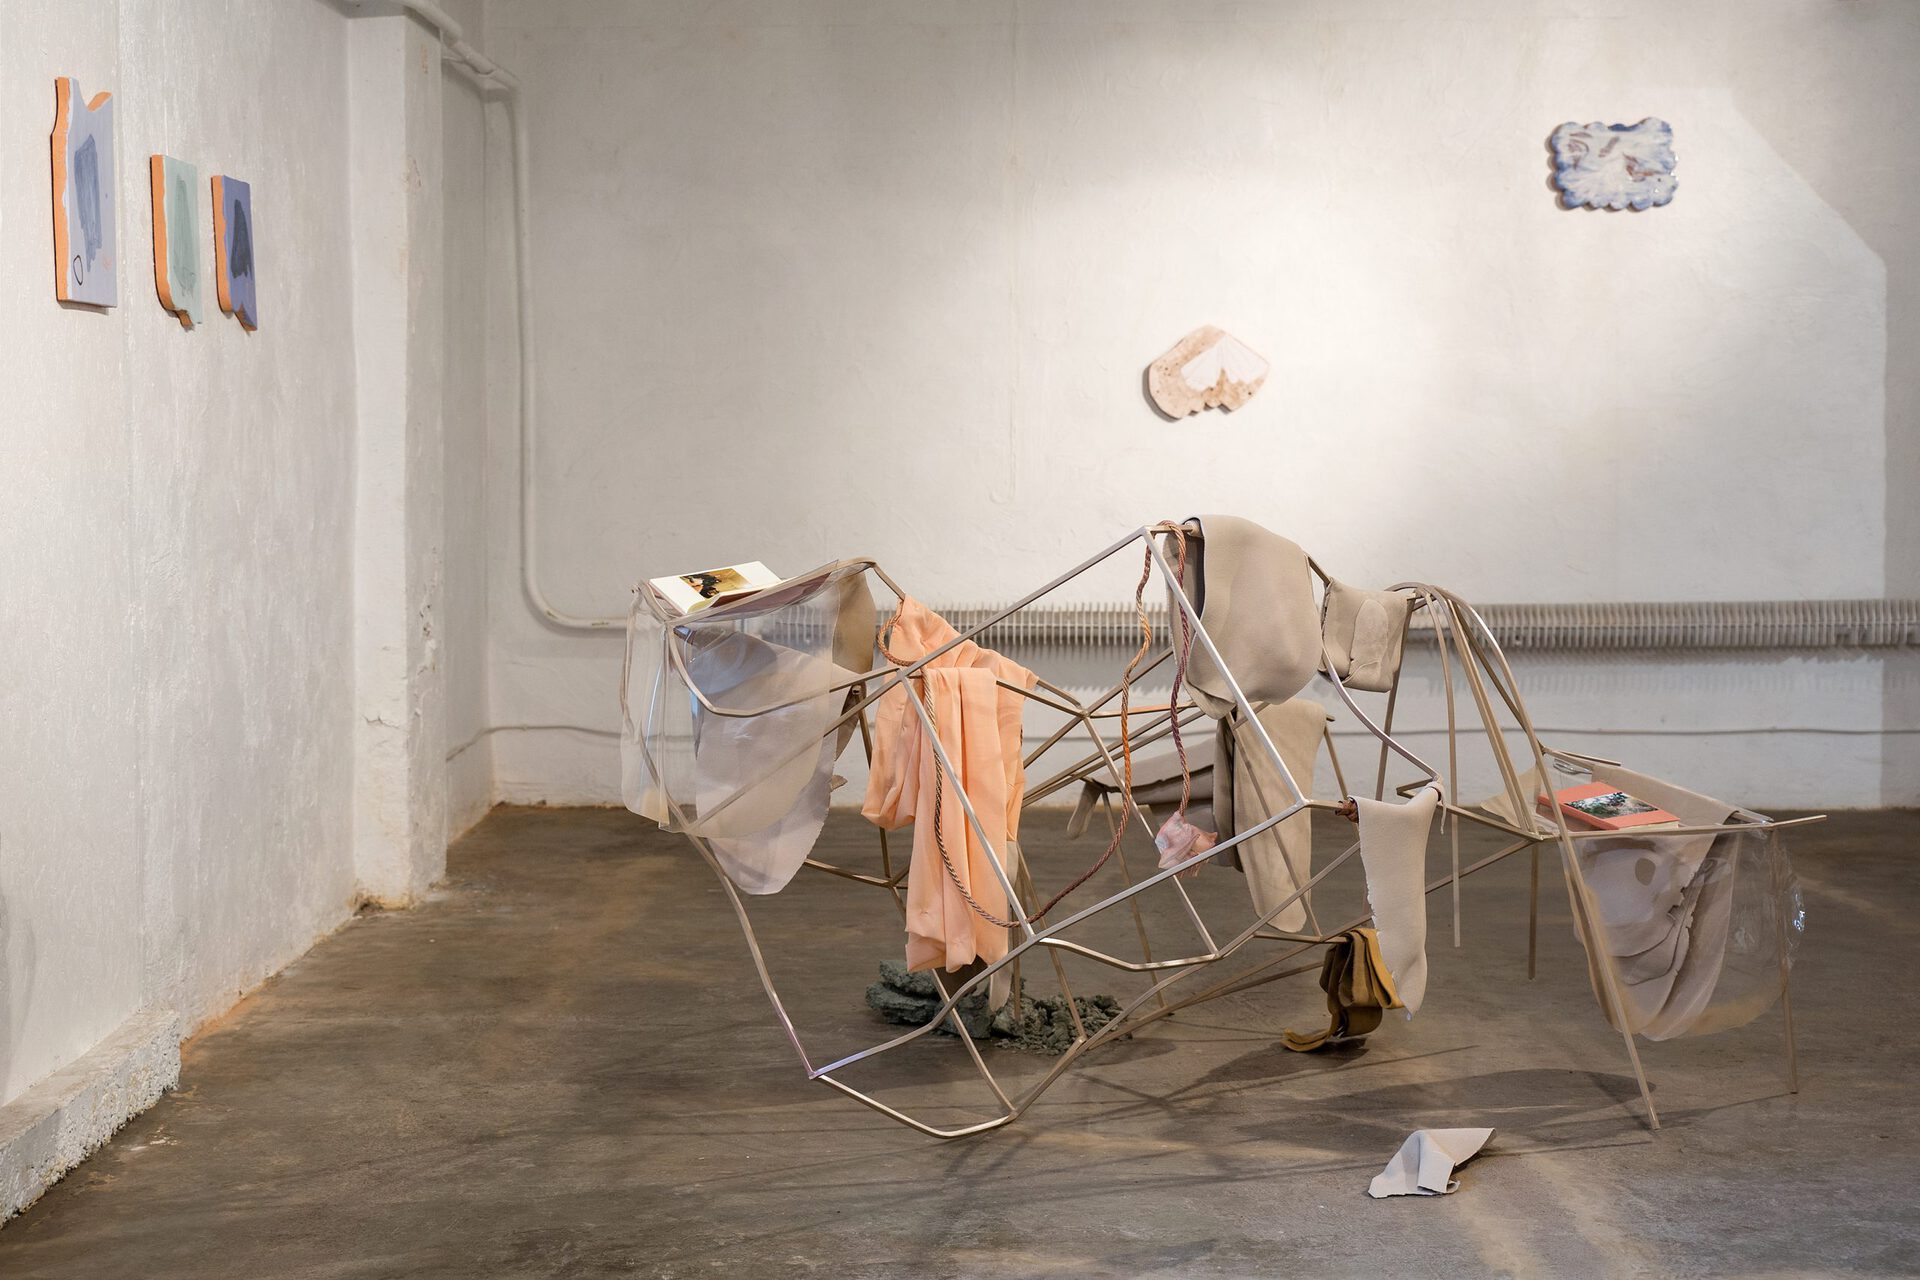 Laura Põld, Shedding skin, 2020. Steel, clay, textile, rope, found objects, spray paint. / Piret Karro, Resistance, 2020. Notebook